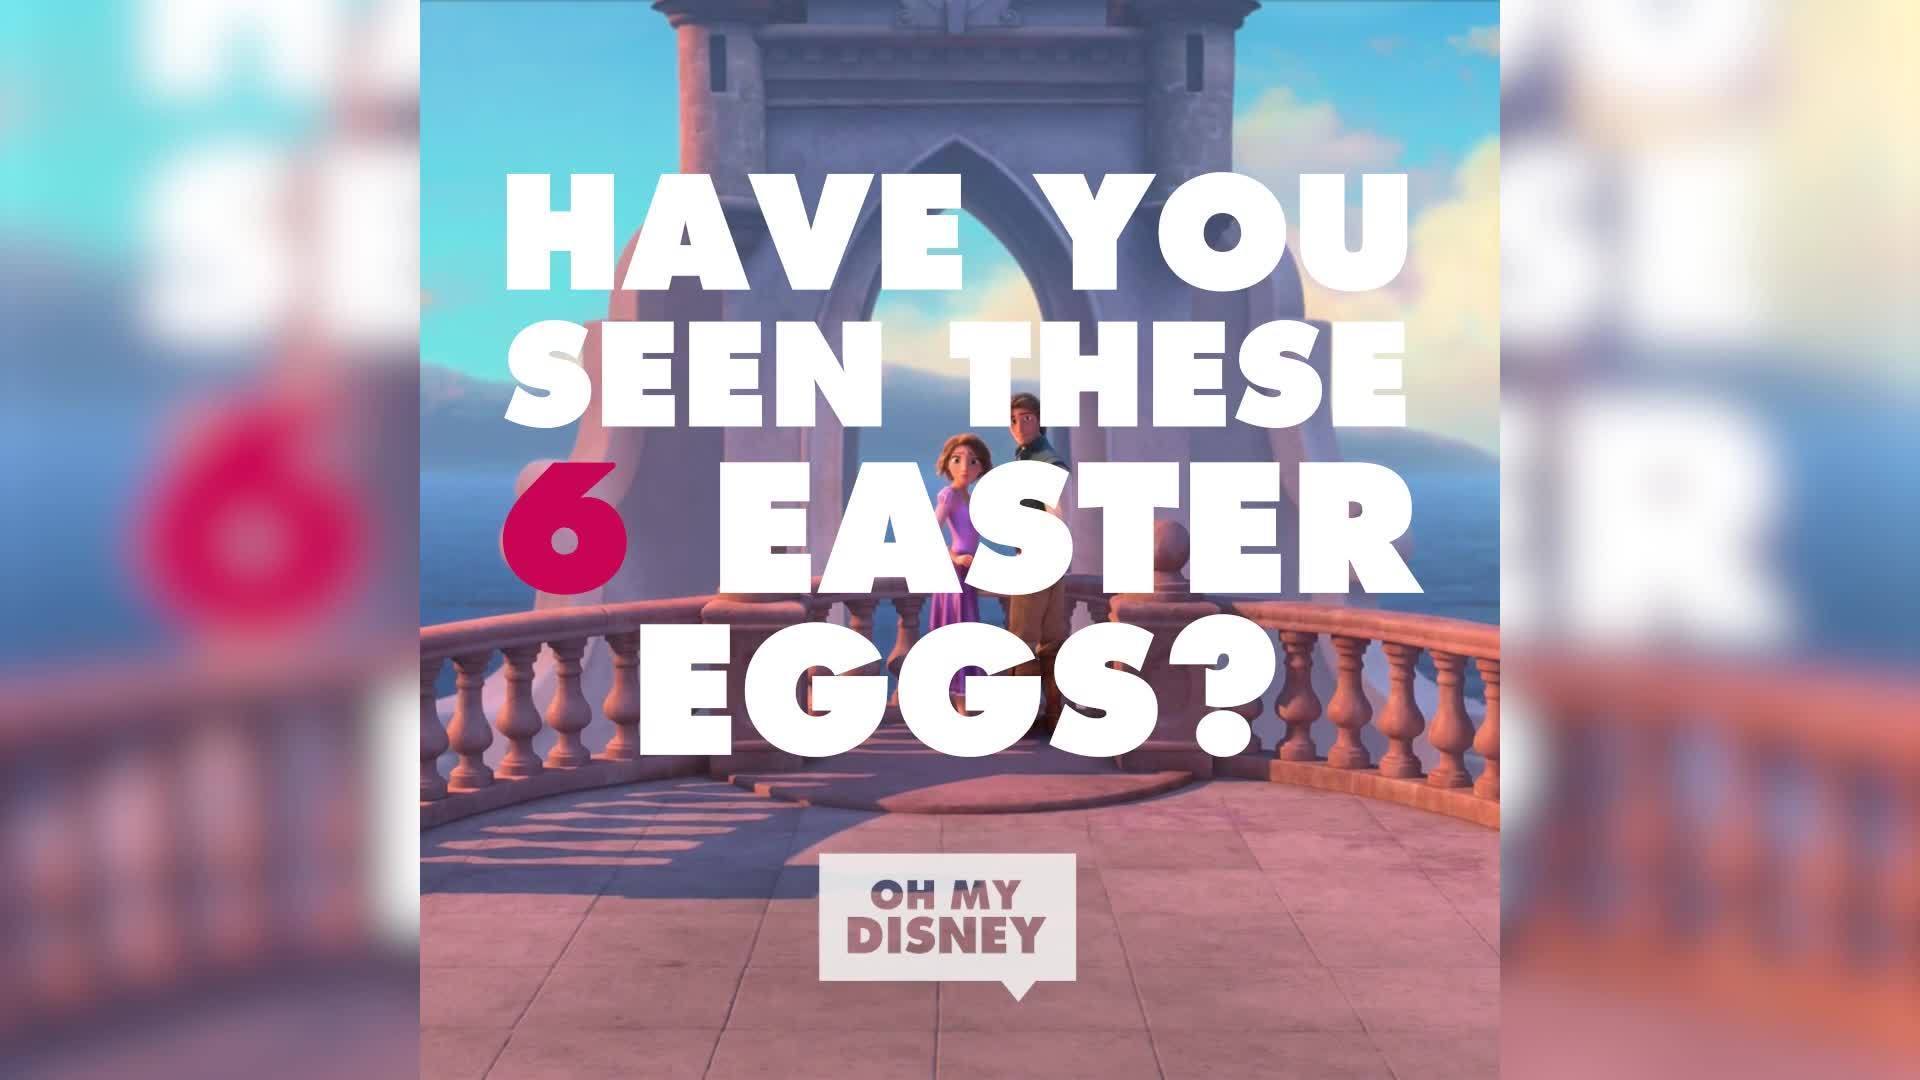 Spot these 6 Easter Eggs